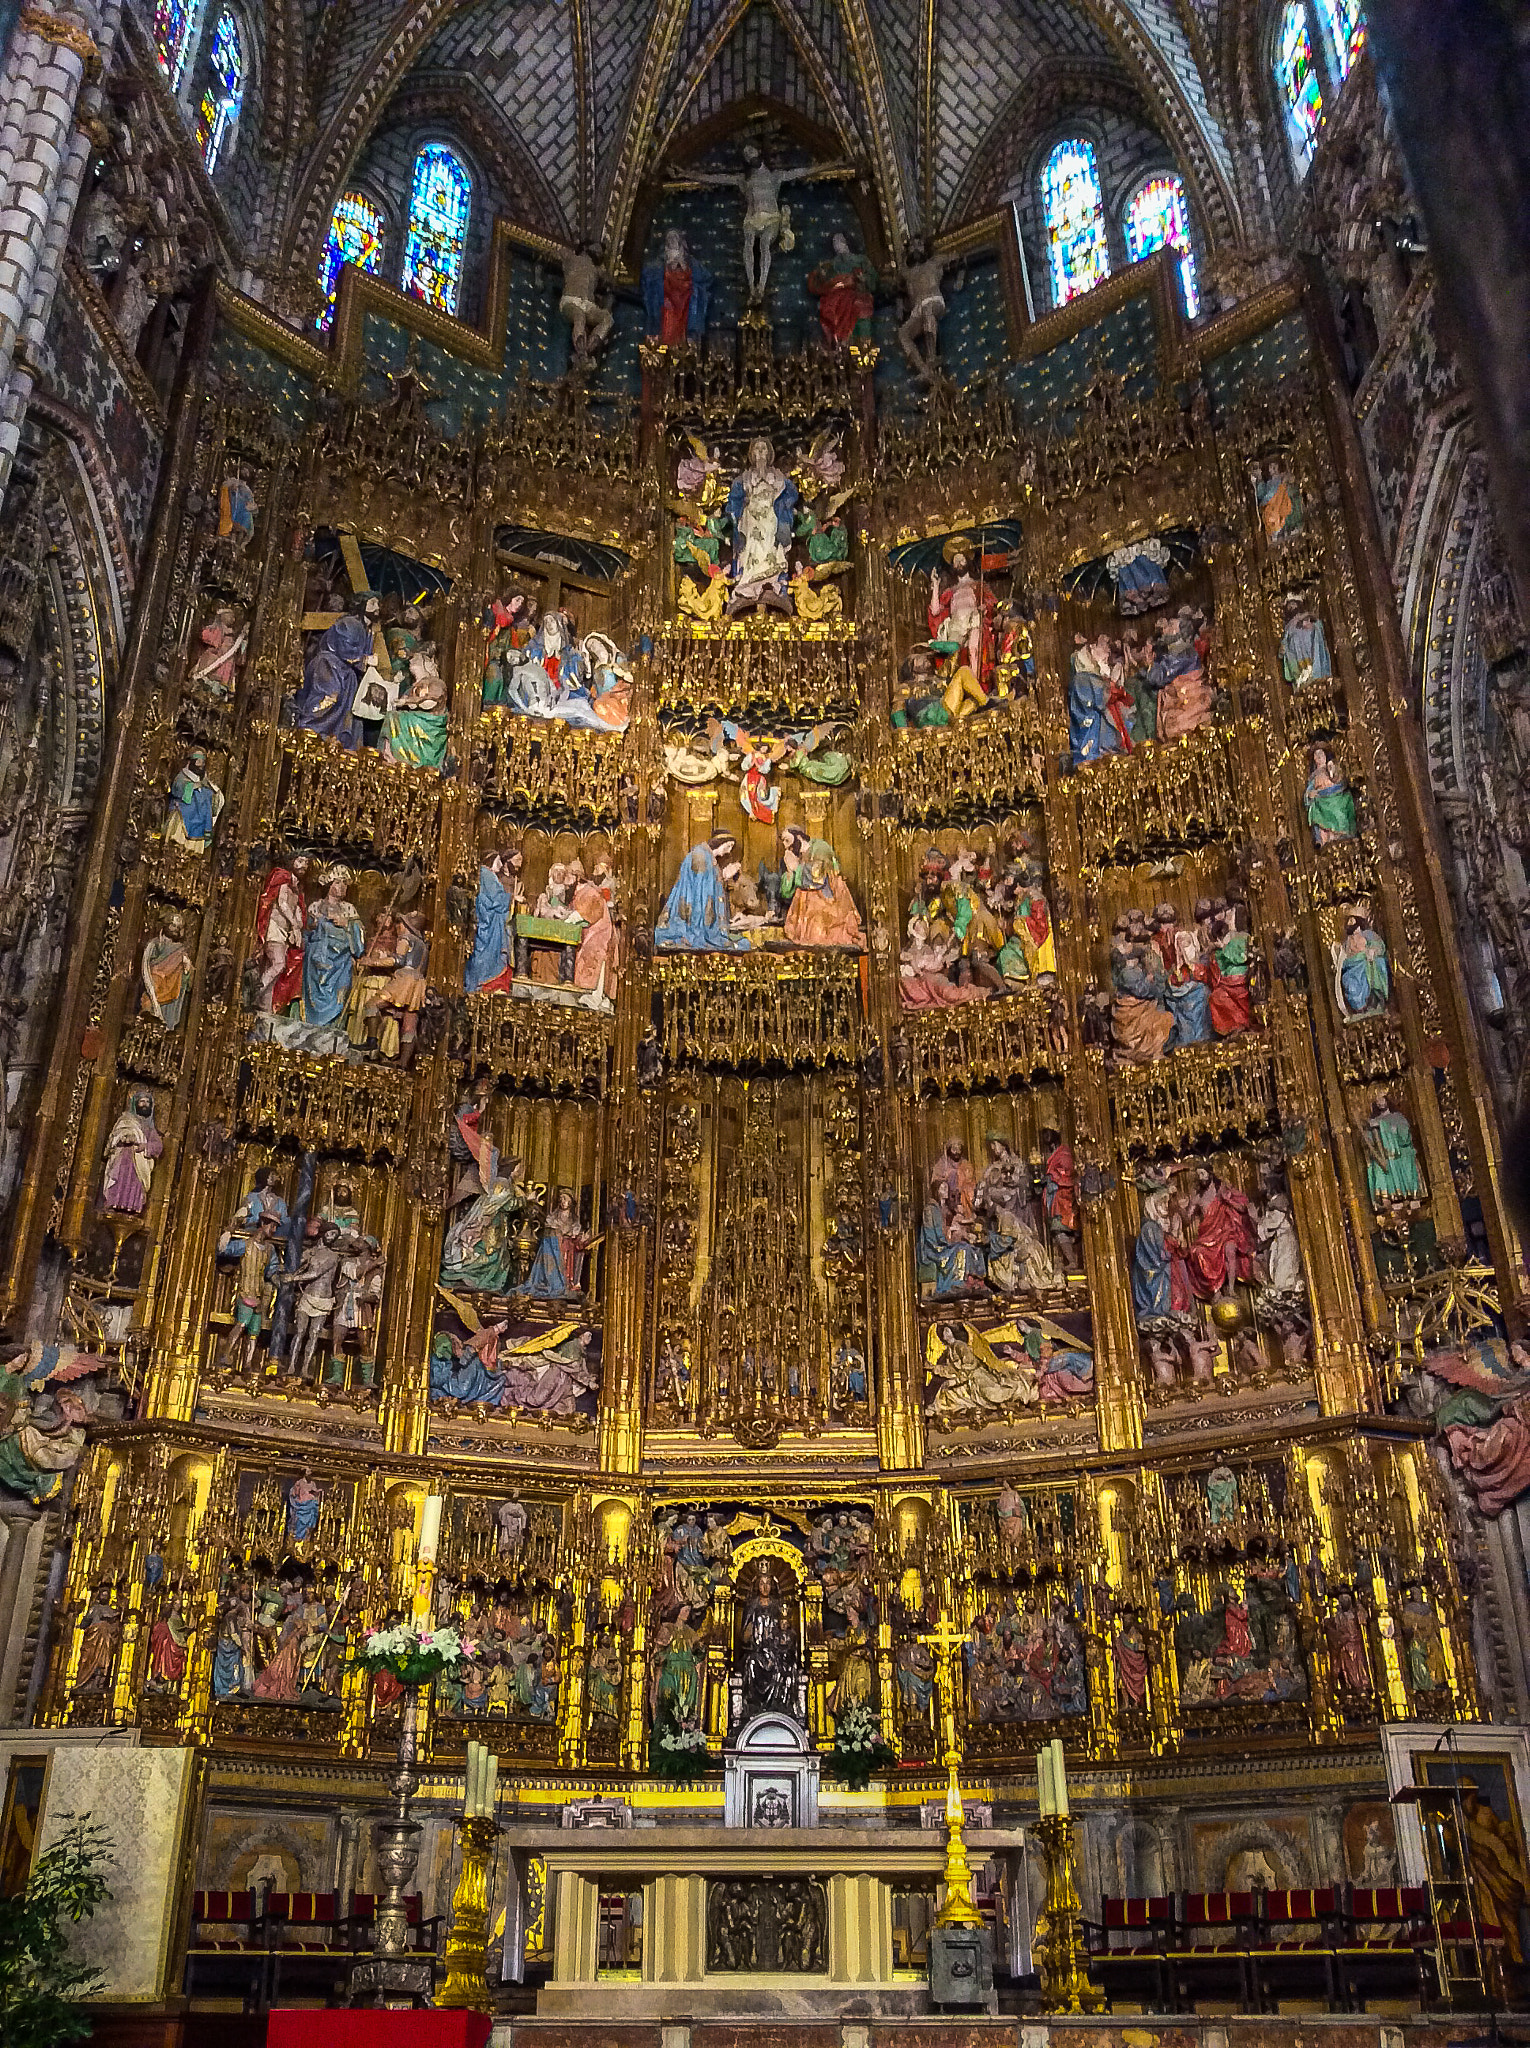 Apple iPad mini 2 sample photo. The retable of the cathedral of toledo, spain. photography